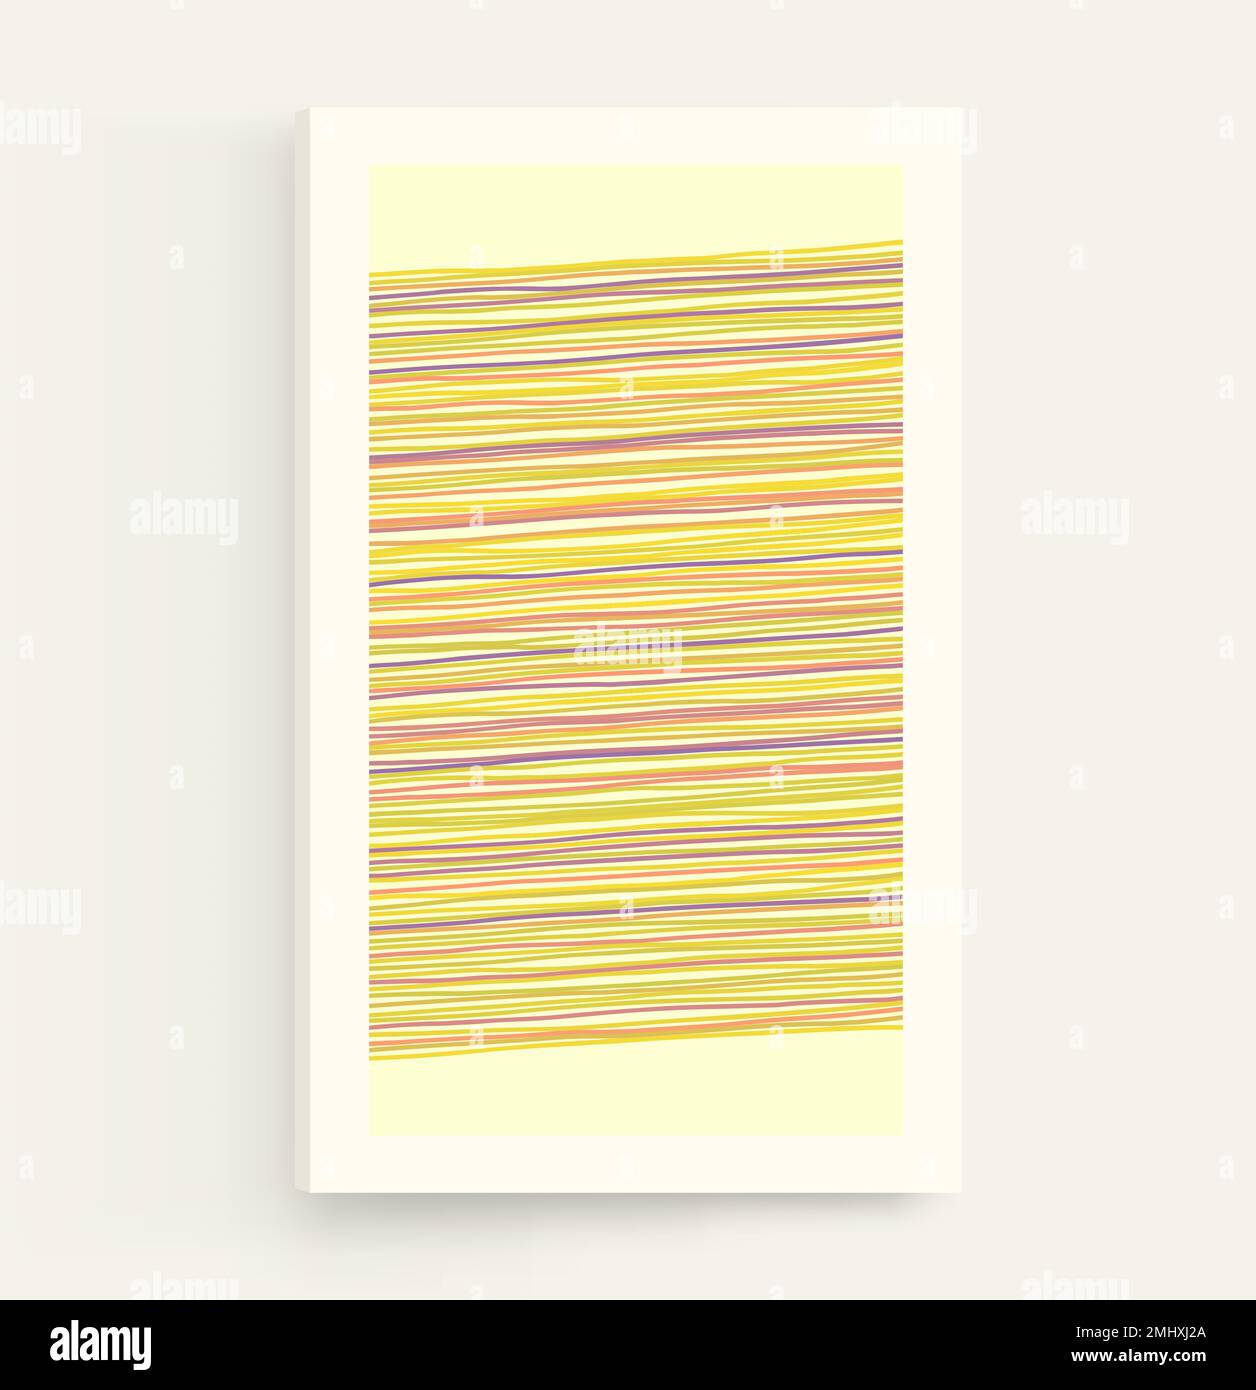 Thin horizontal lines background. Geometric wallpaper with stripes. Linear pattern. Cover design template. Vector illustration. Stock Vector